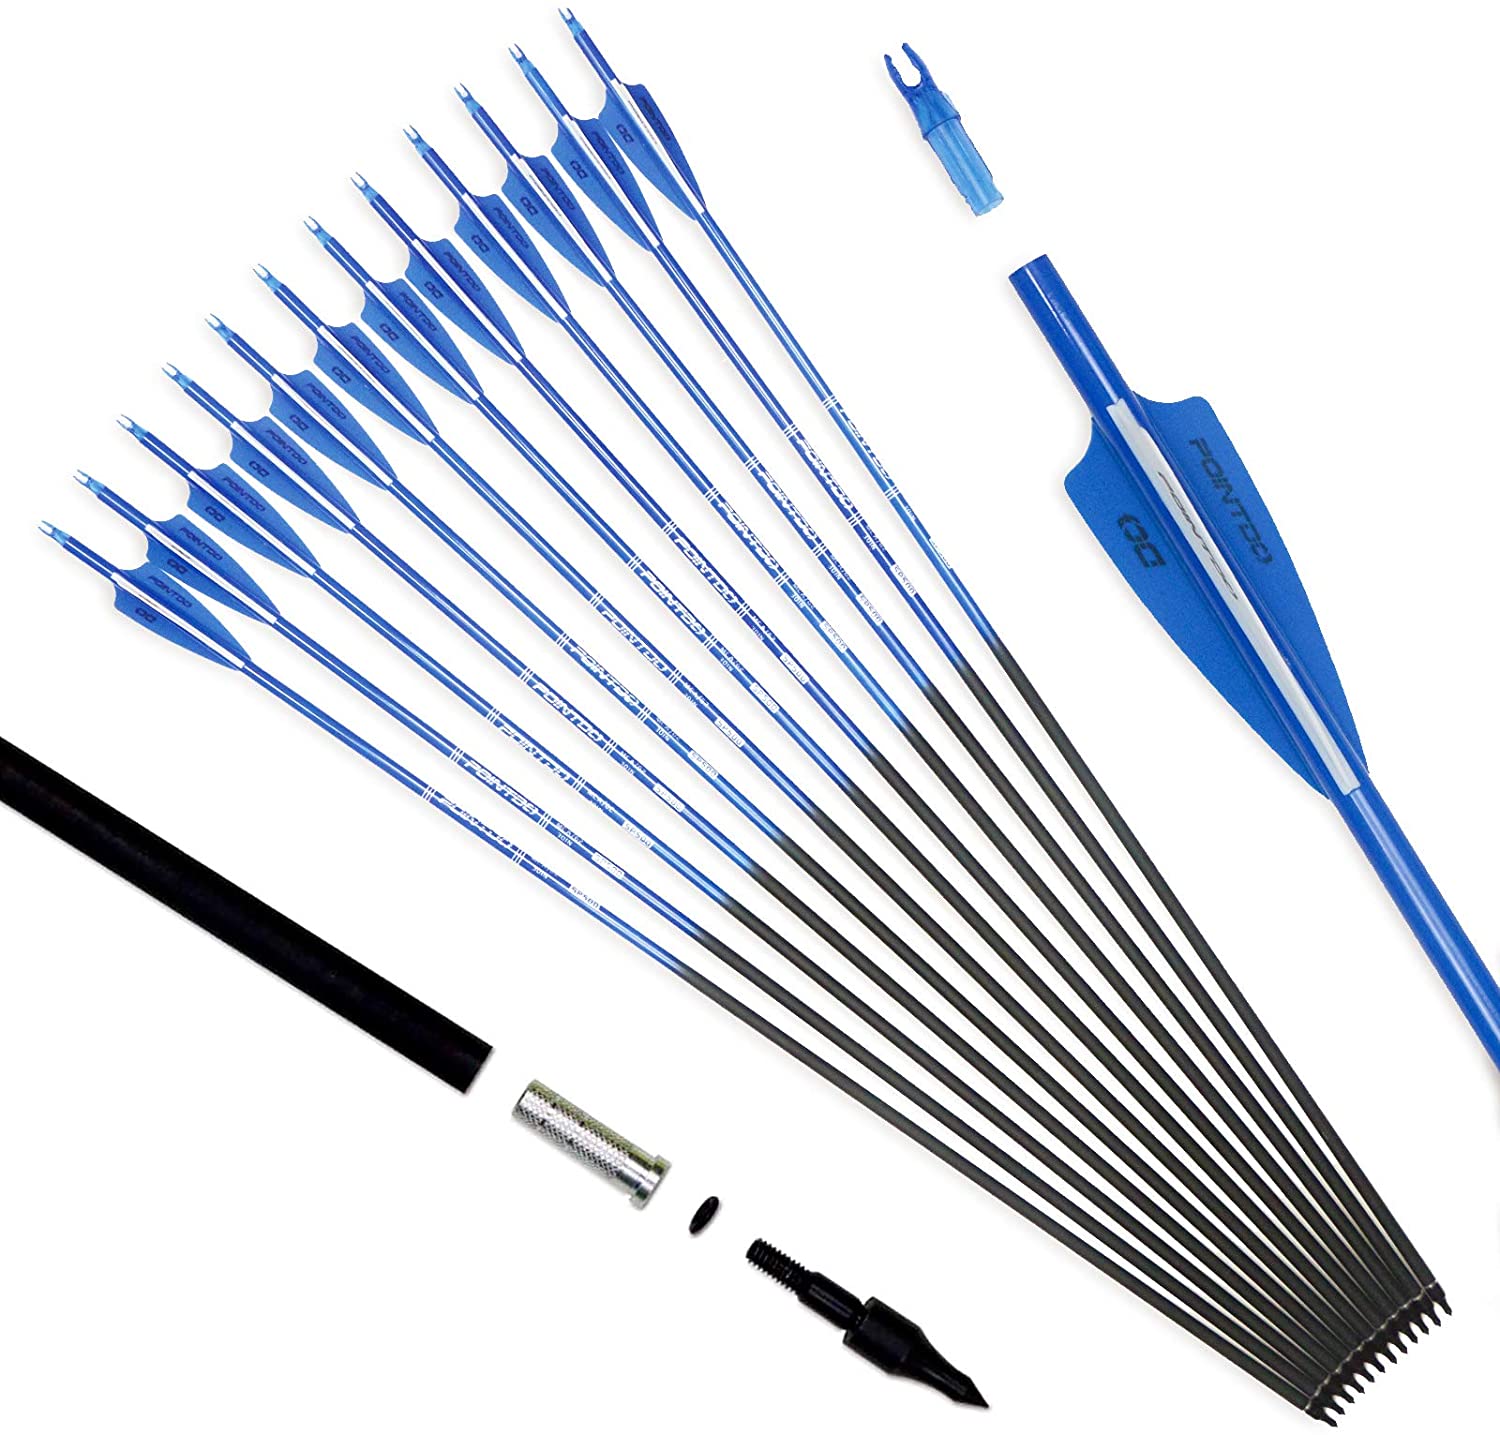 Pointdo 30inch Carbon Arrow Fluorescence Color Targeting and Practice and Hunting Arrows for Compound Bow and Recurve Bow with Removable Tips(Pack of 12)